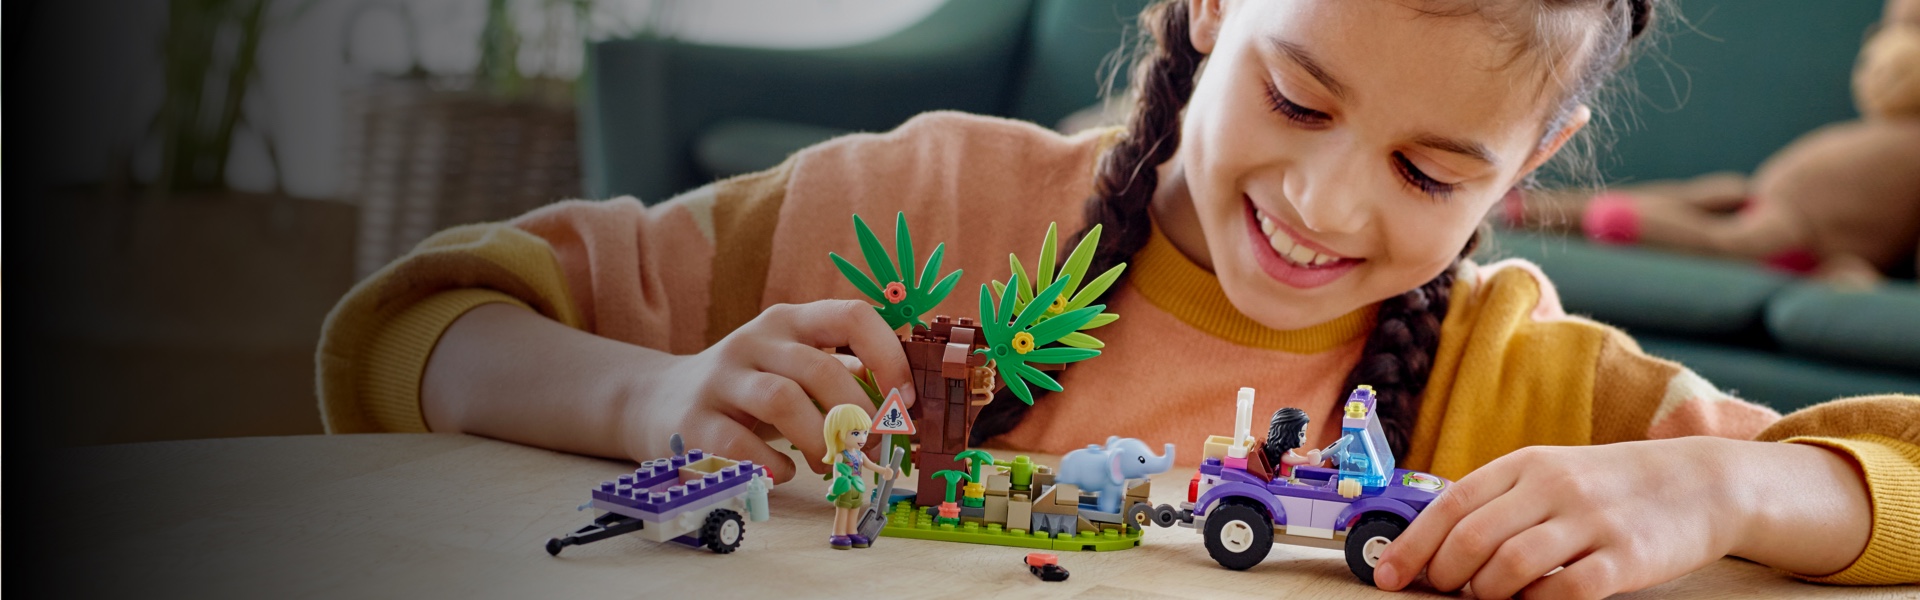 National Geographic | Lego Friends | Lego City | Official LEGO